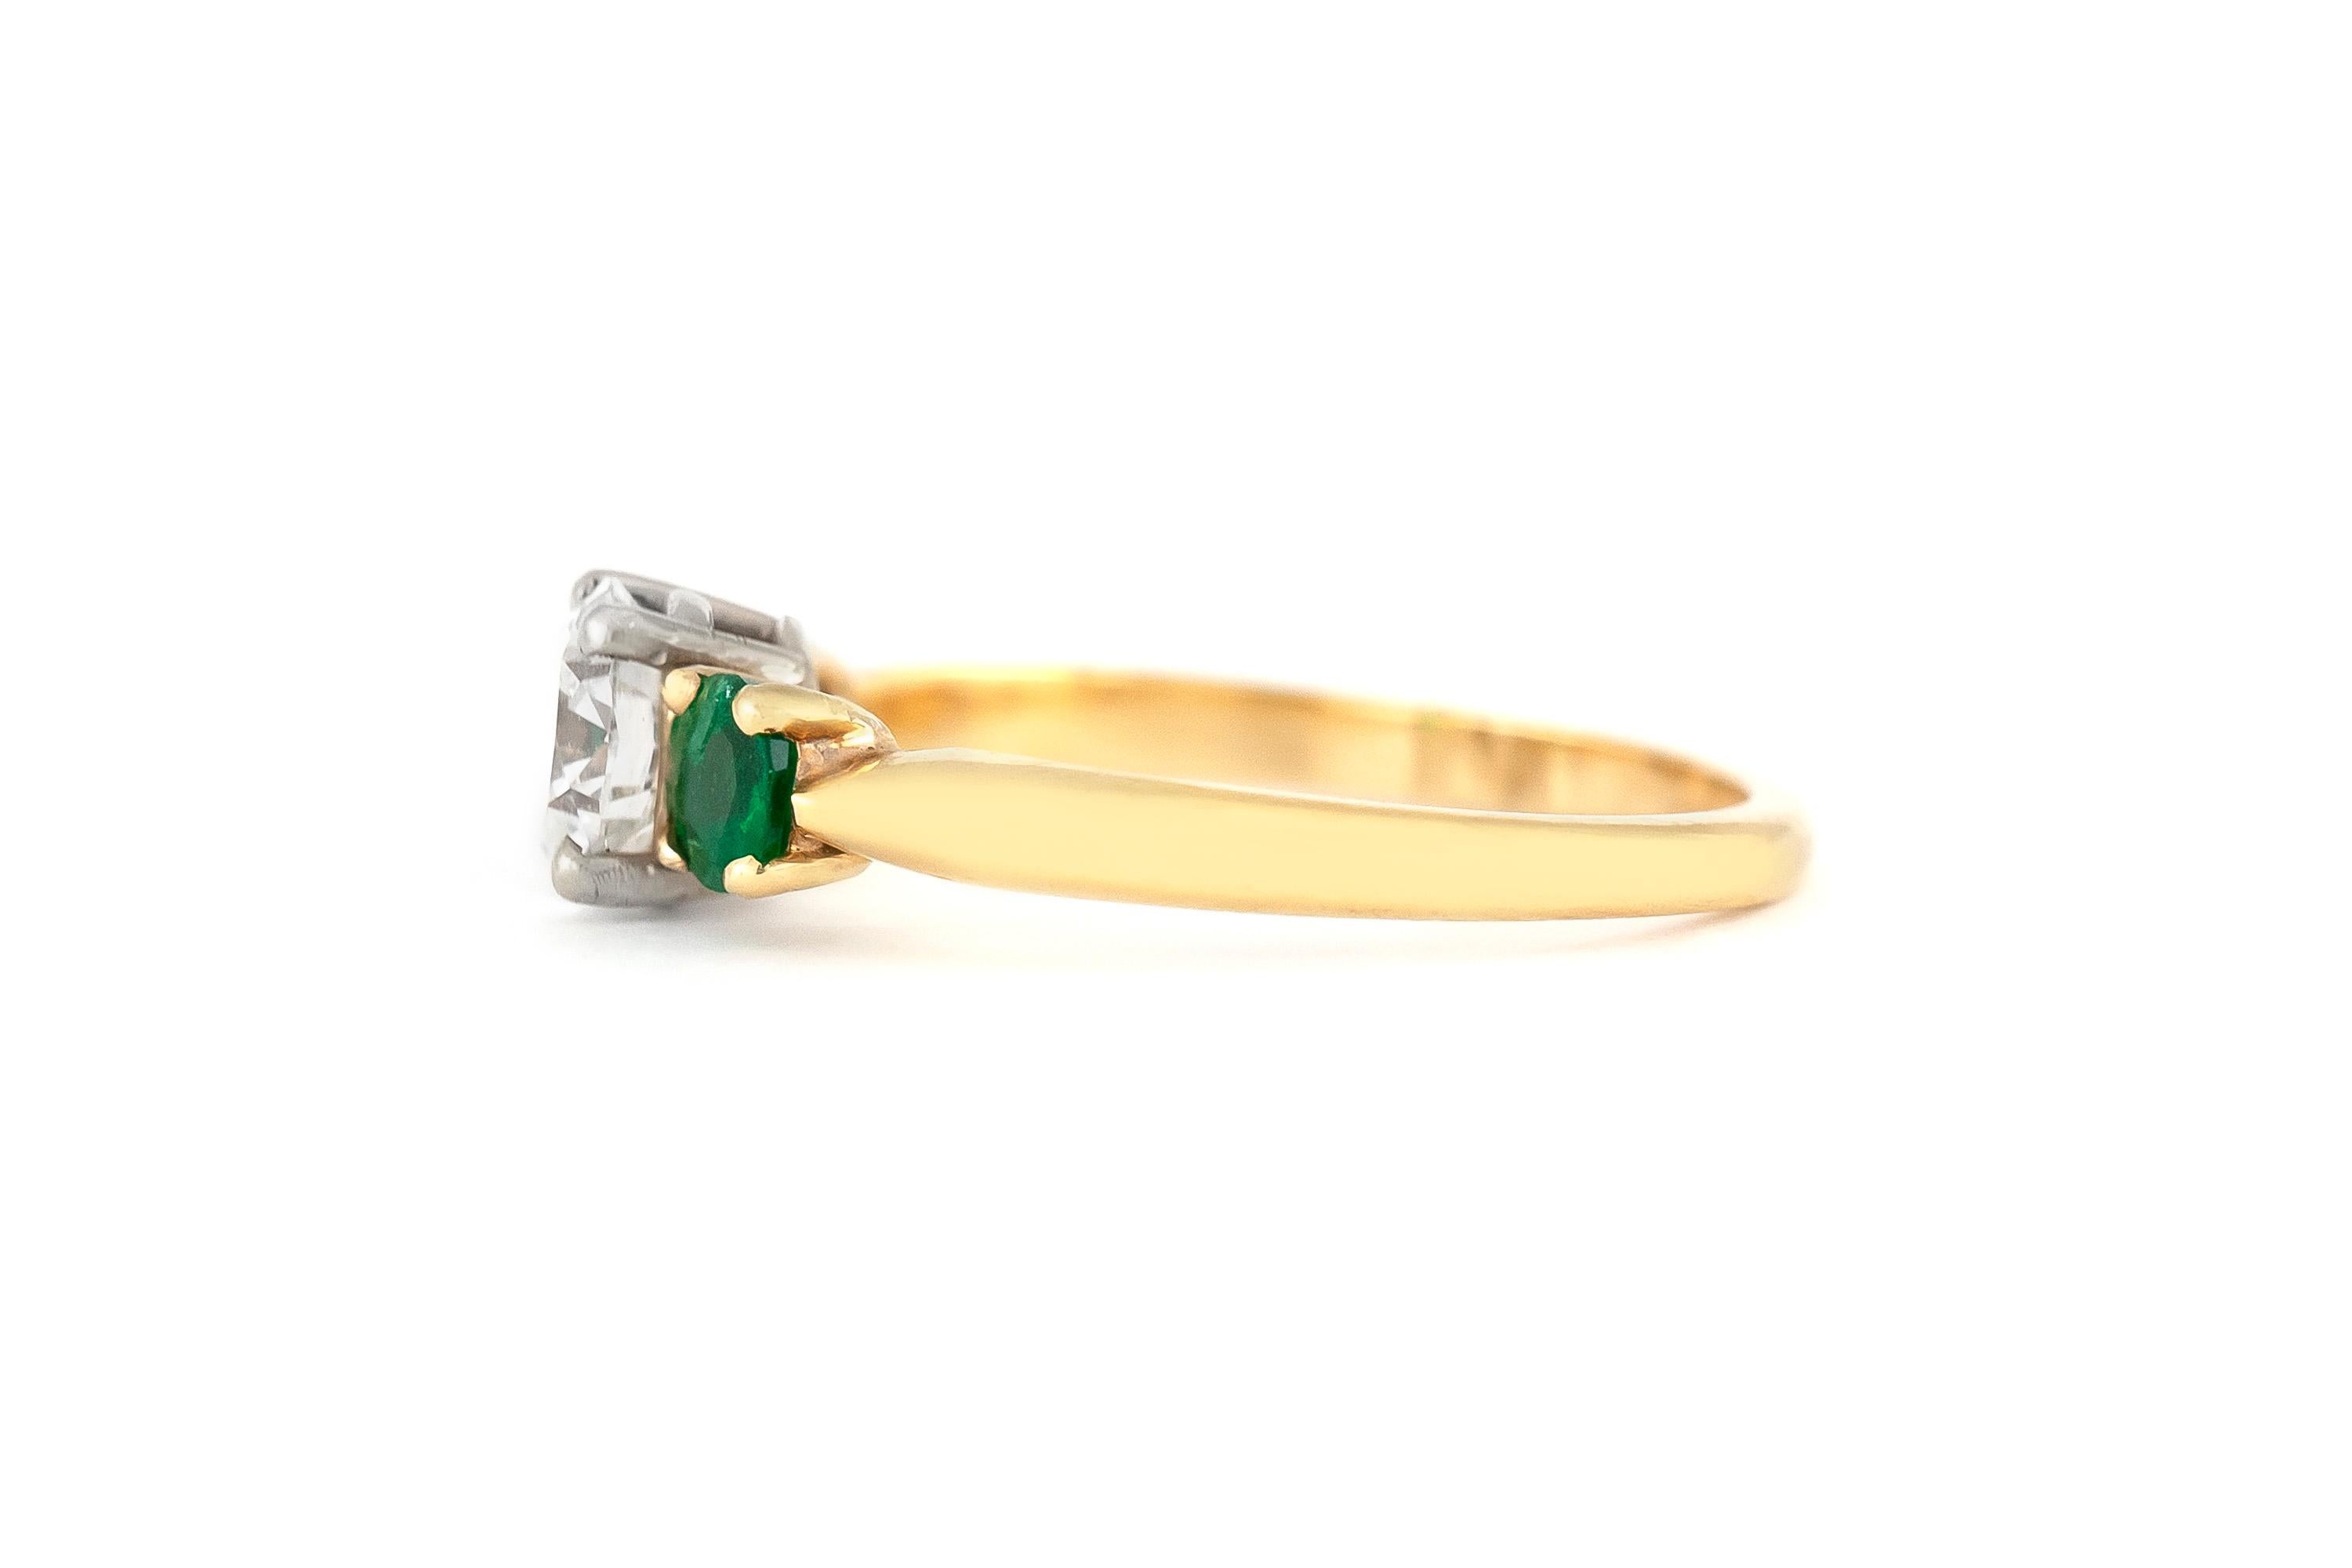 The ring is finely crafted in 14 k yellow gold with center diamond weighing approximately total of 0.74 carat and with two side emerald stone weighing approximatey total of 0.50 carat.
Circa 1940.